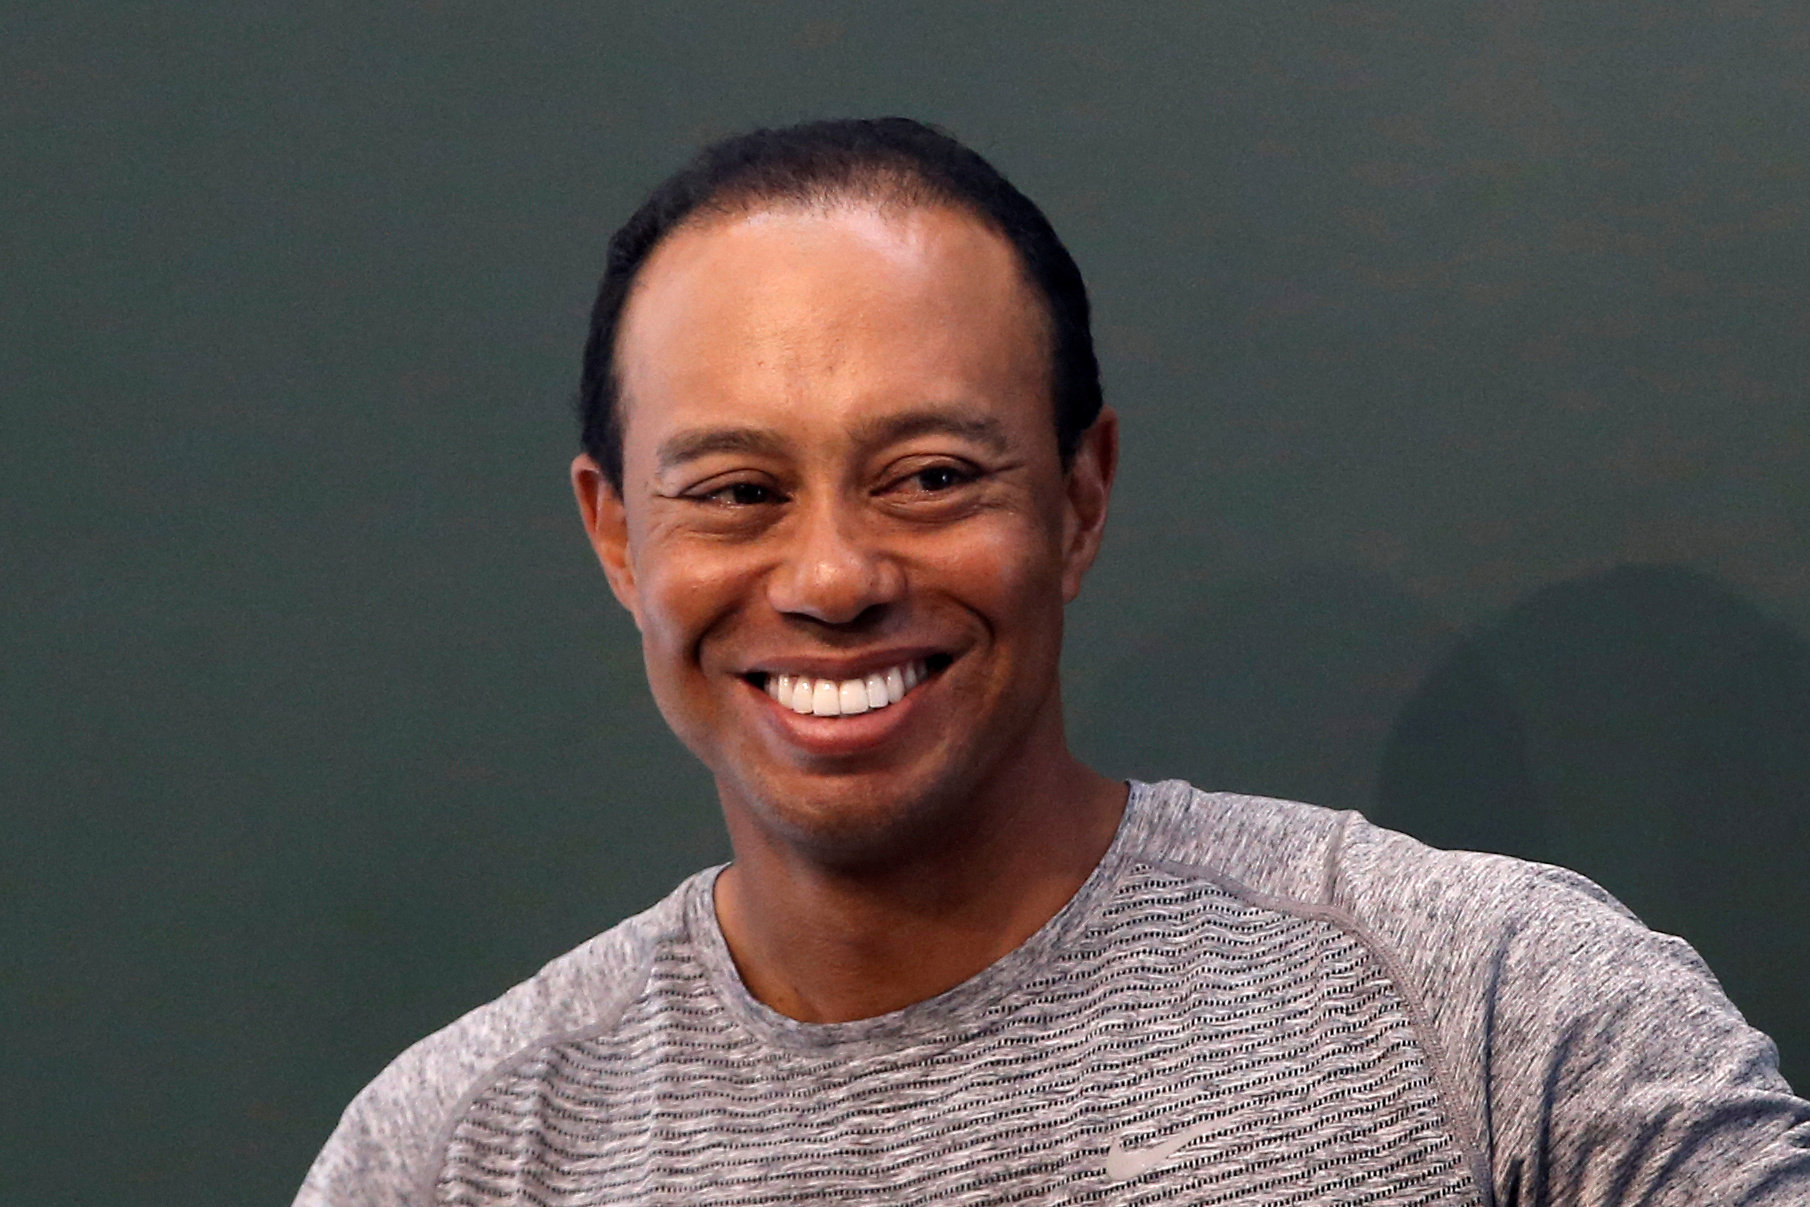 Golfer Tiger Woods arrested in Florida on DUI charge